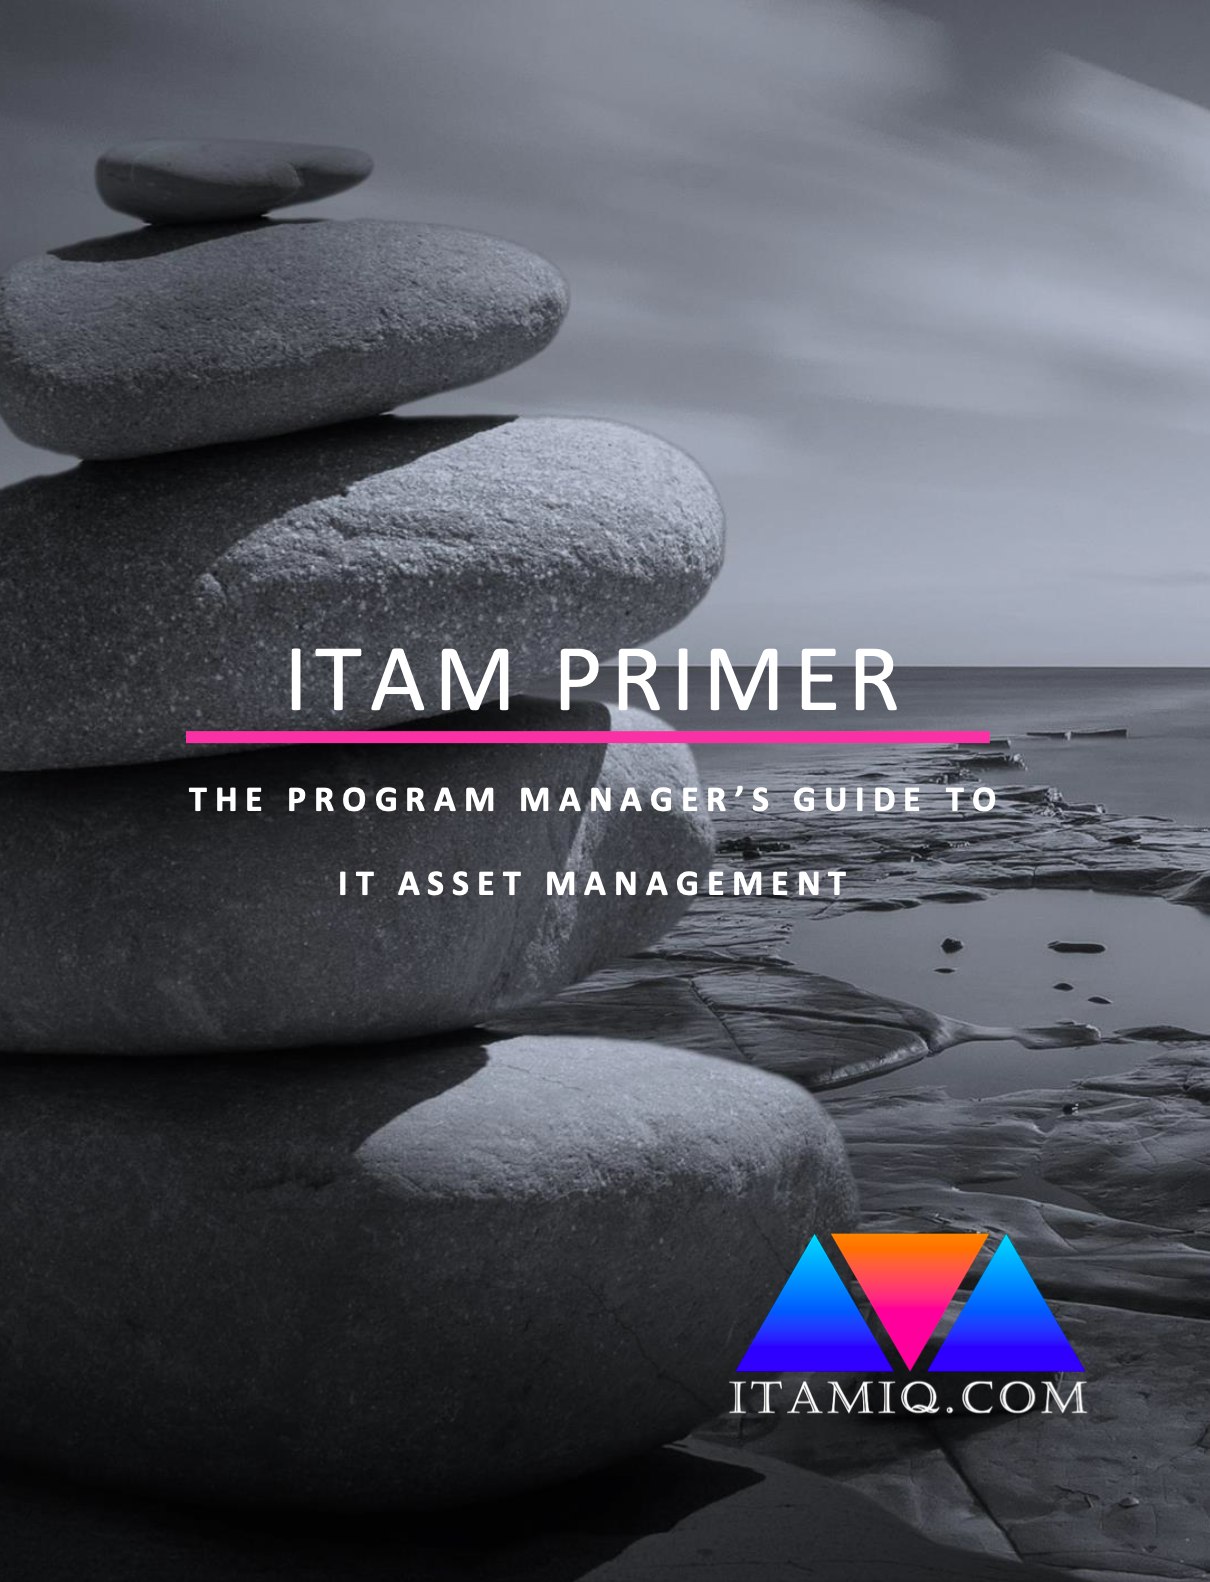 ITAM Primer - The Program Manager's Guide to IT Asset Management